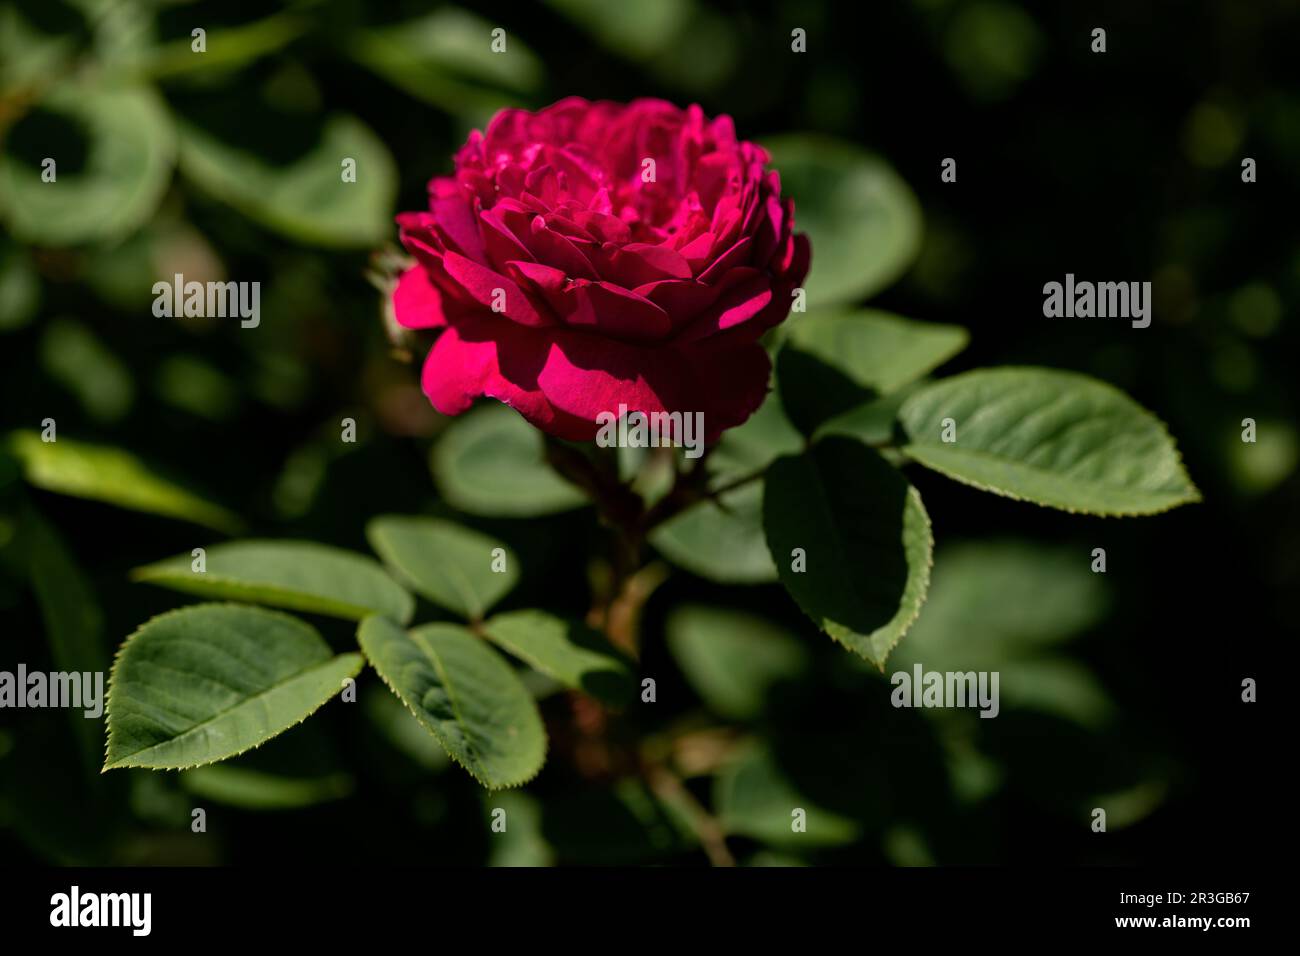 Single red rose (Rosa) in a garden Stock Photo